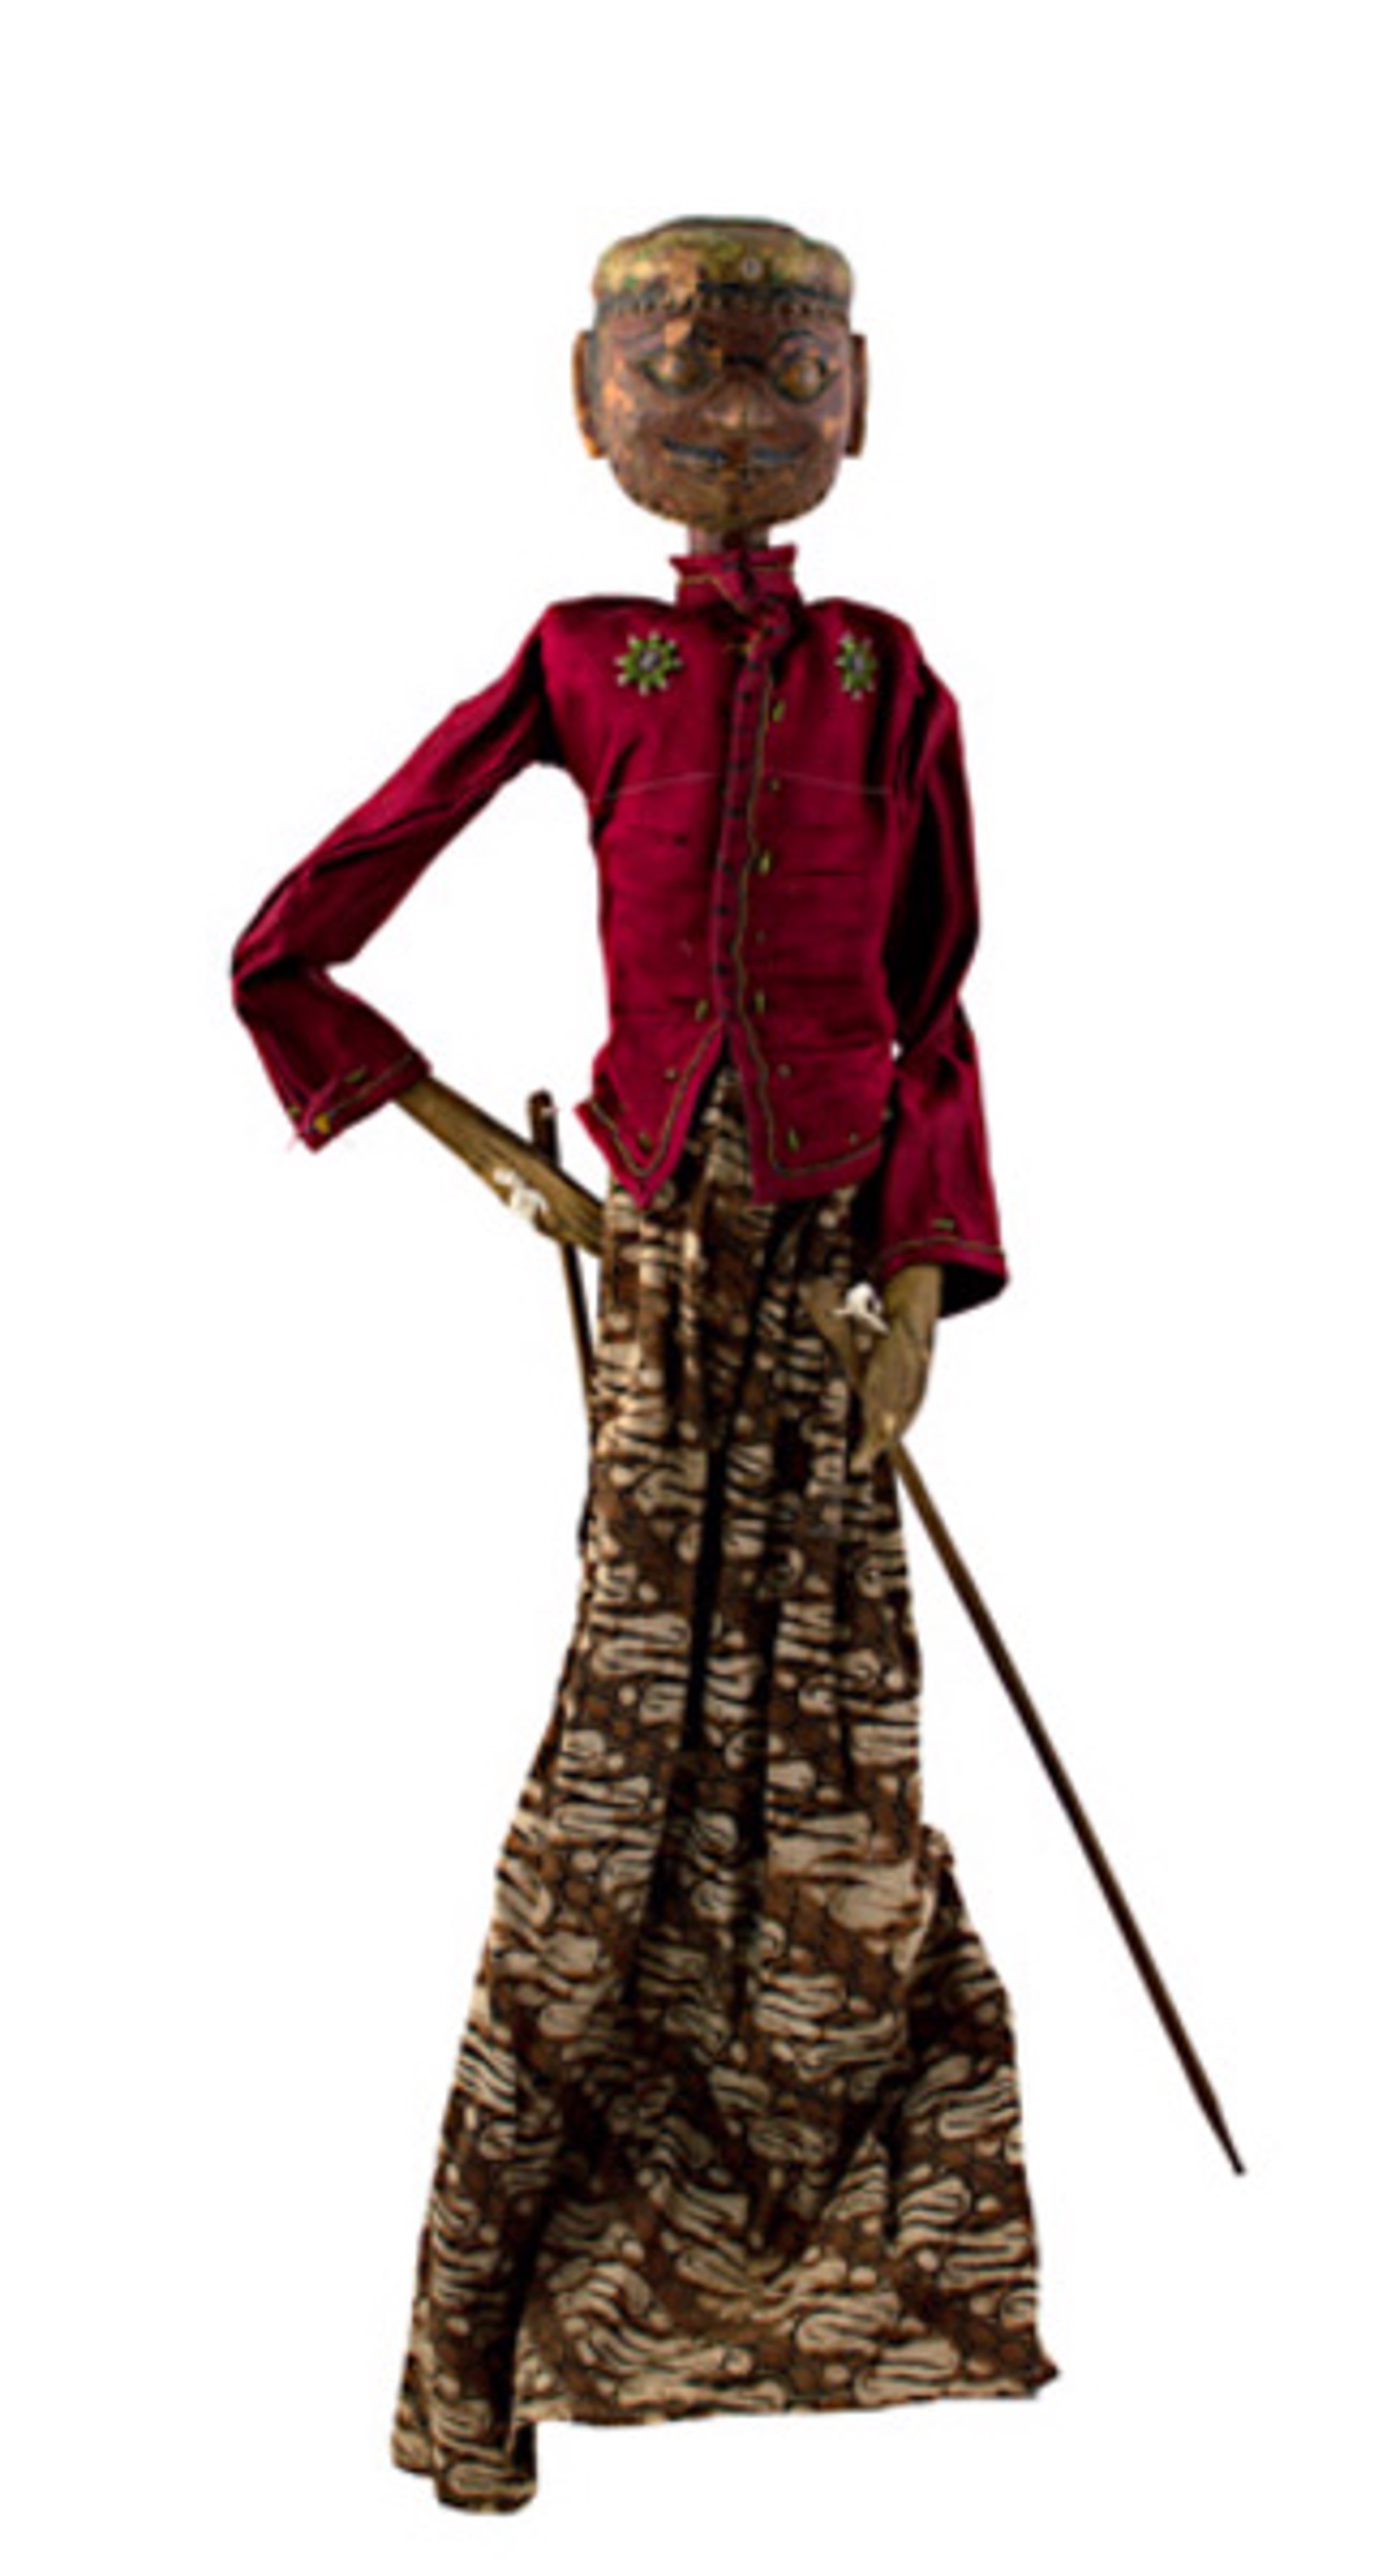 Golek Puppet (Male) by Indonesian